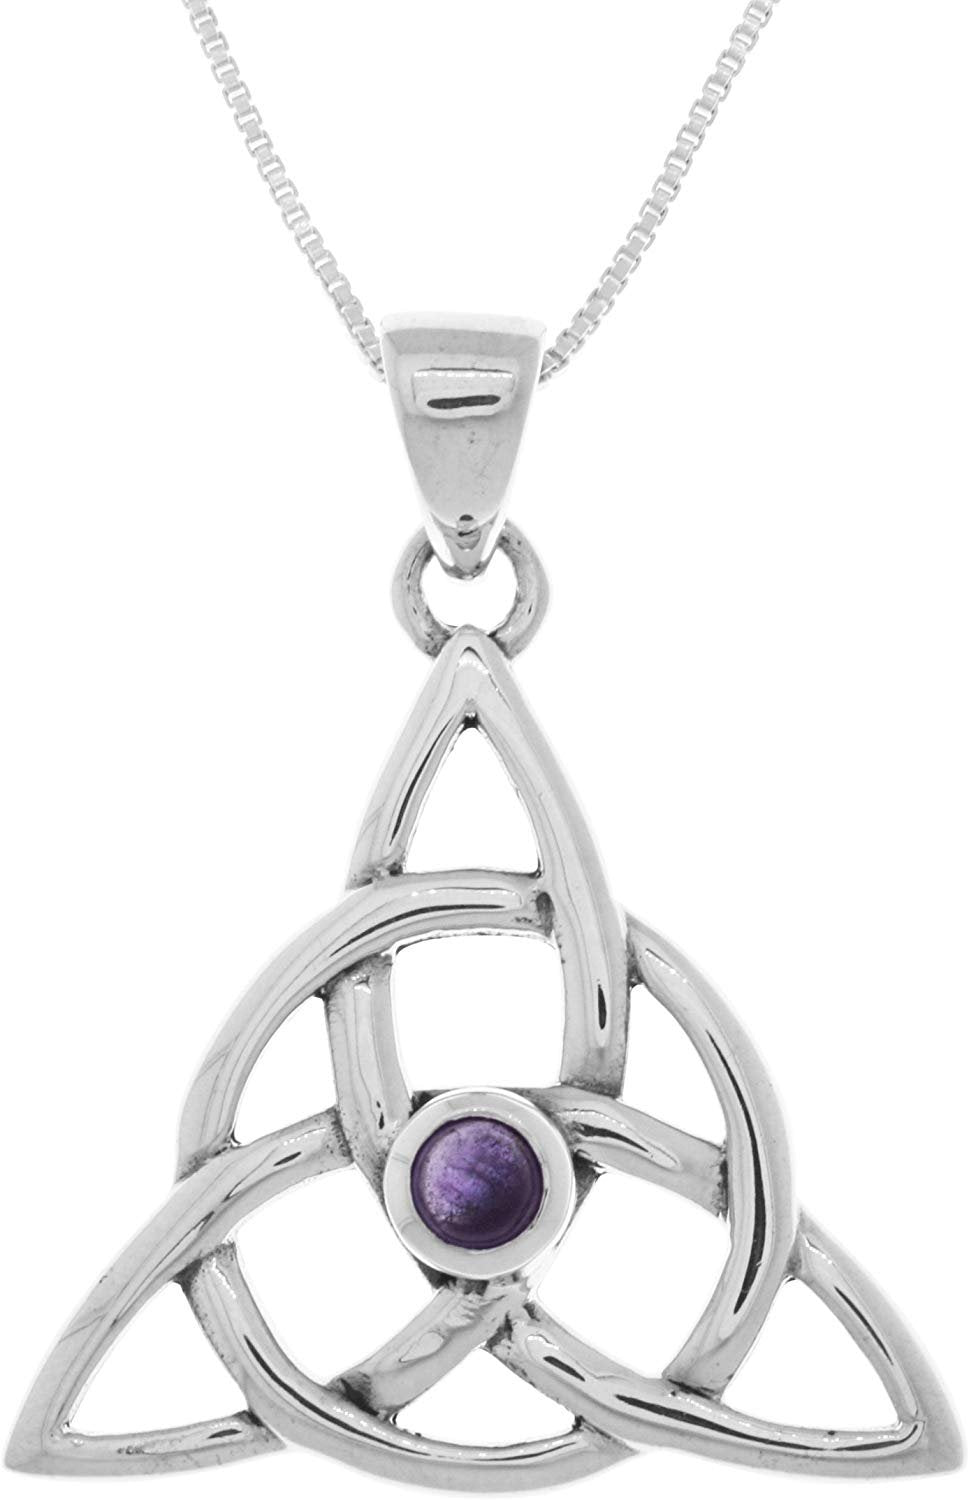 Jewelry Trends Sterling Silver Celtic Triquetra Pendant with Amethyst on 18 Inch Box Chain Necklace